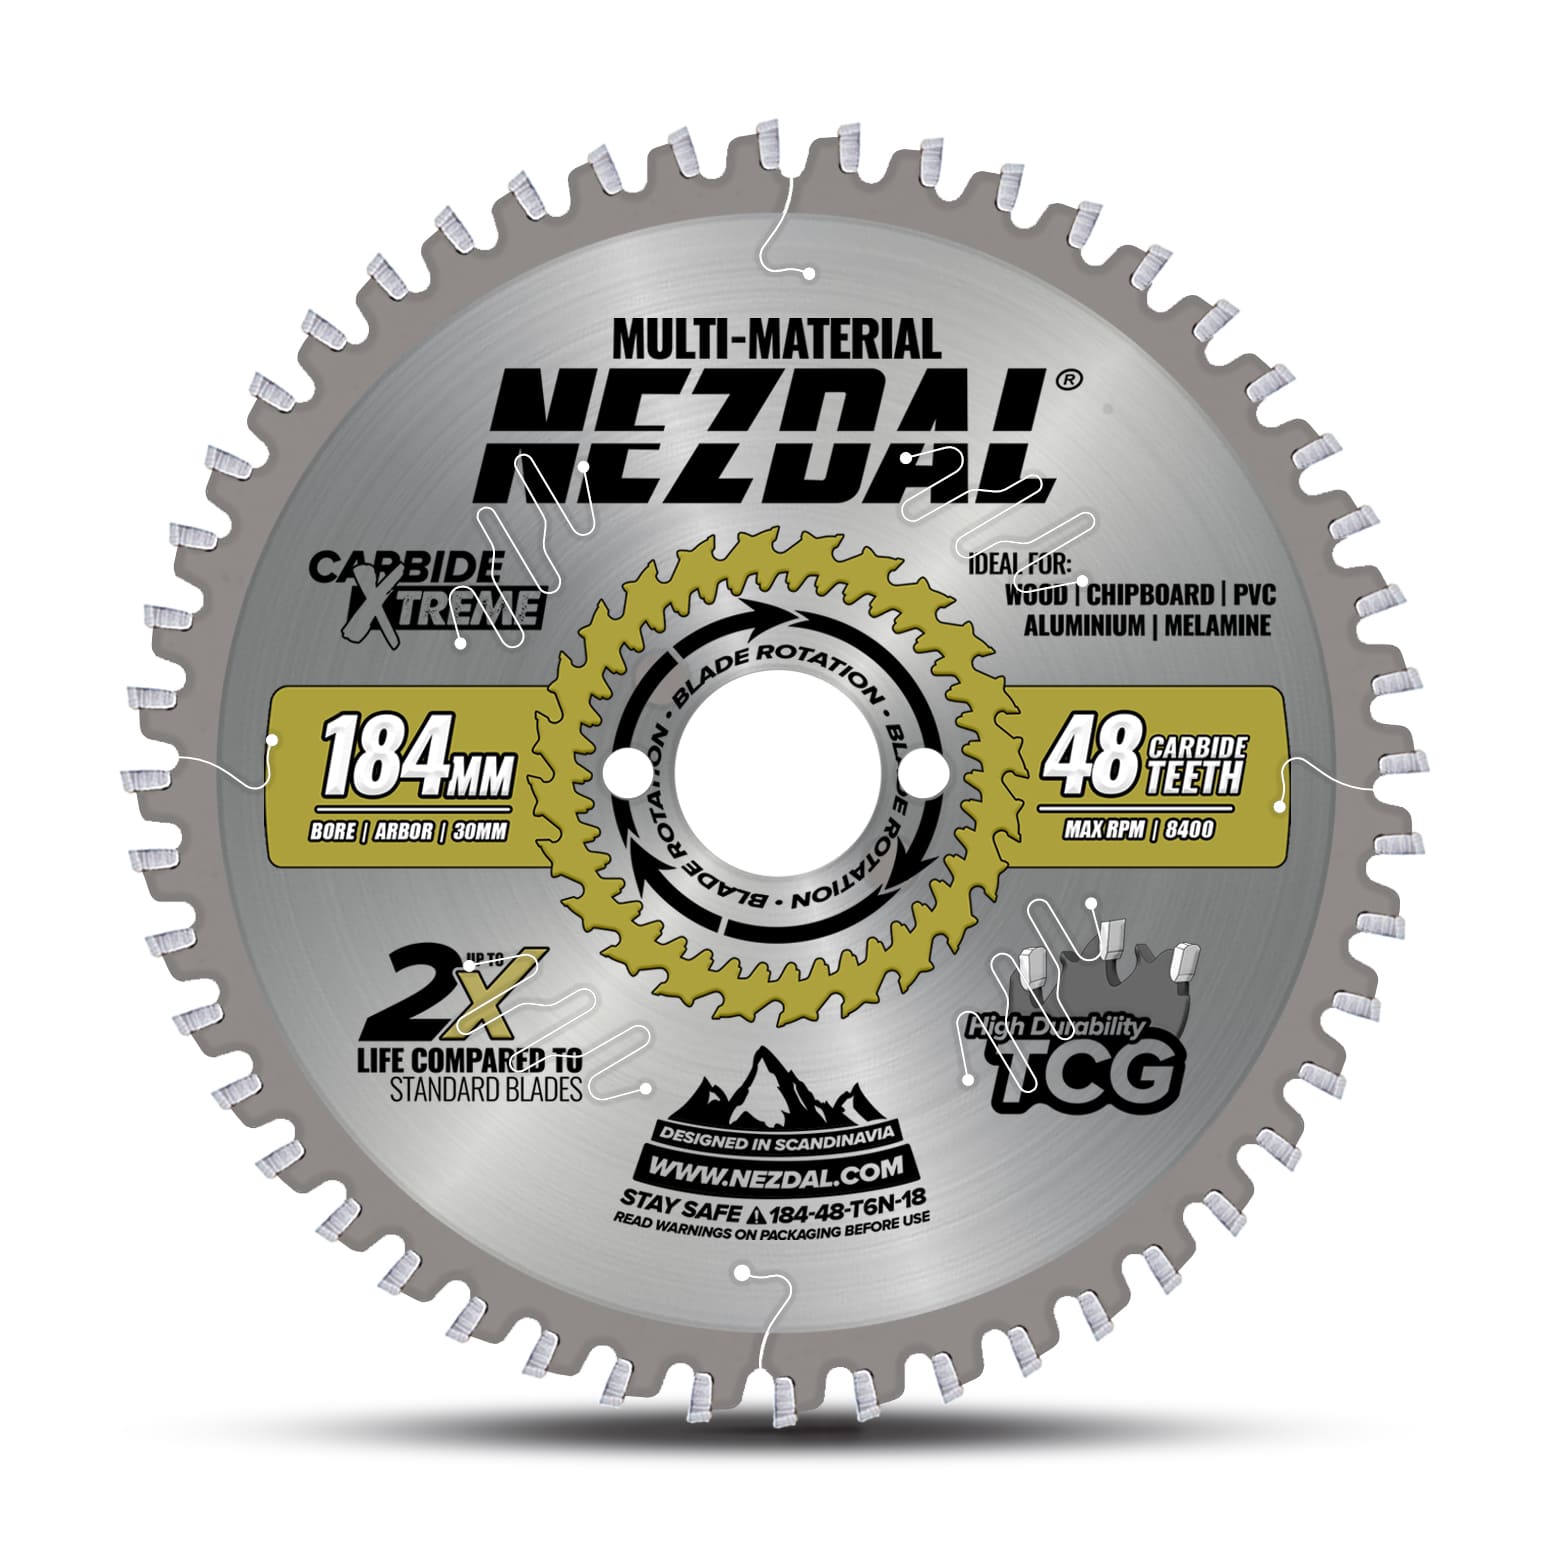 184mm saw blade with 48 teeth for multi-material cuts